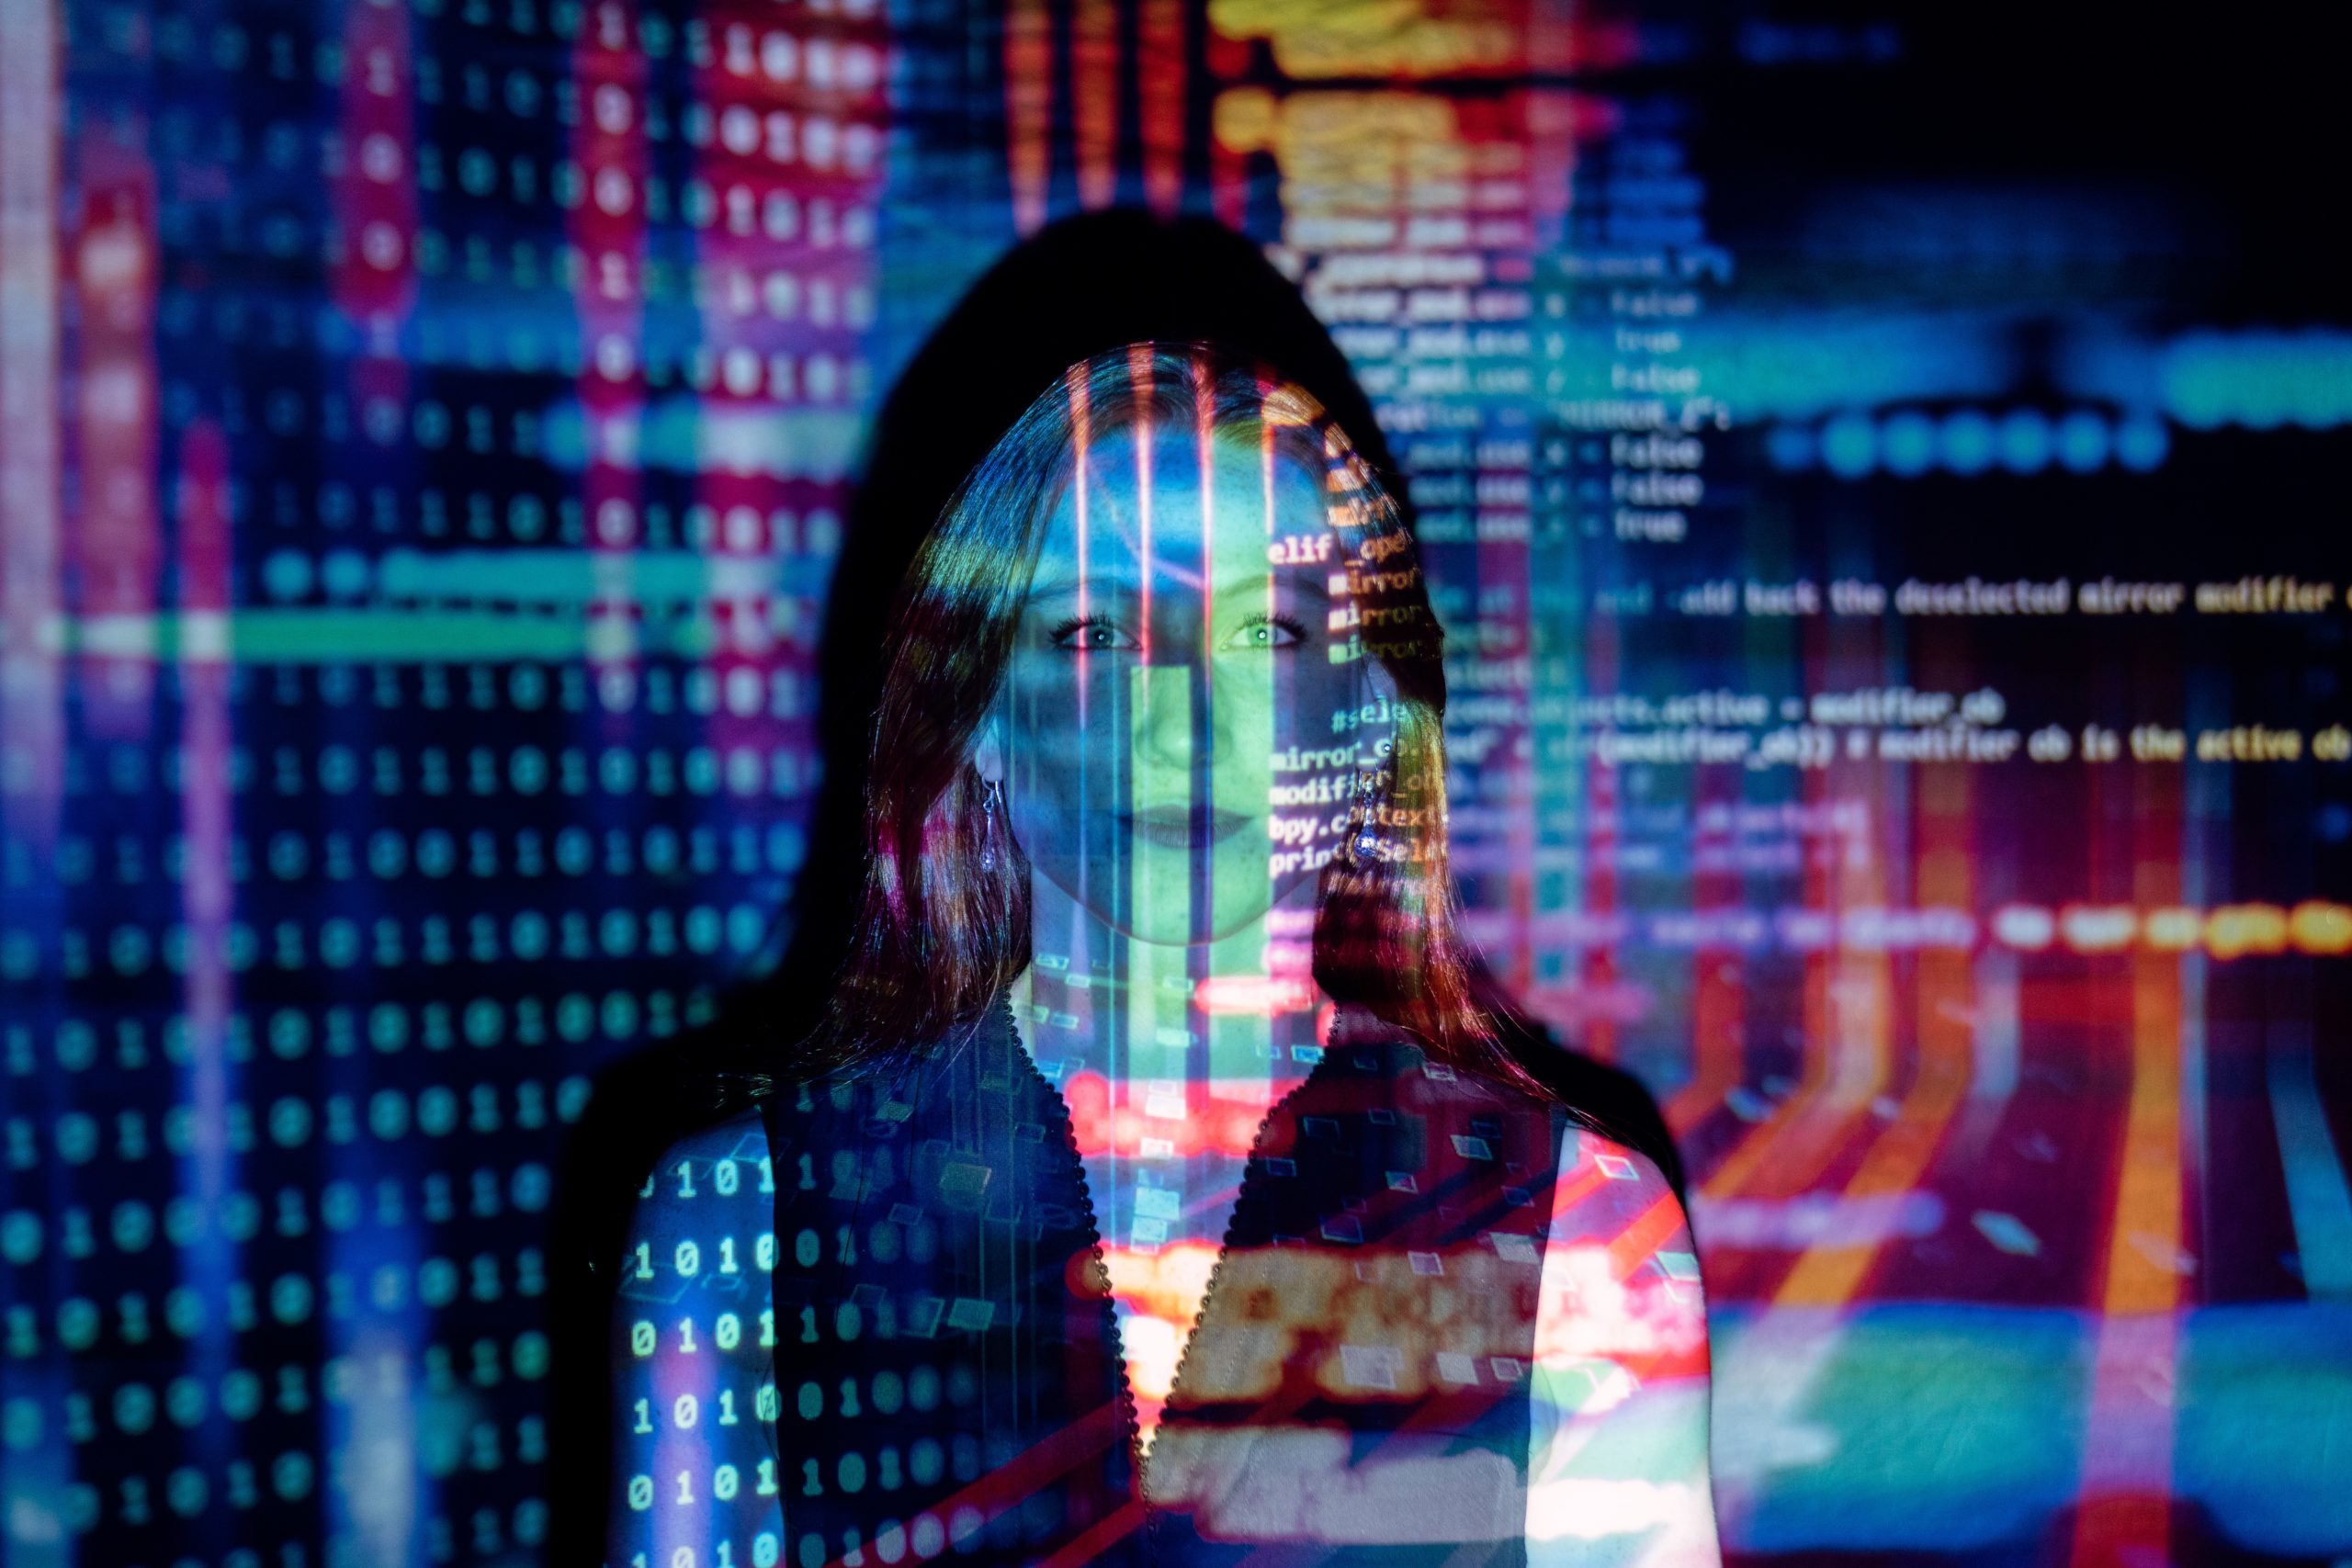 code projected over a woman